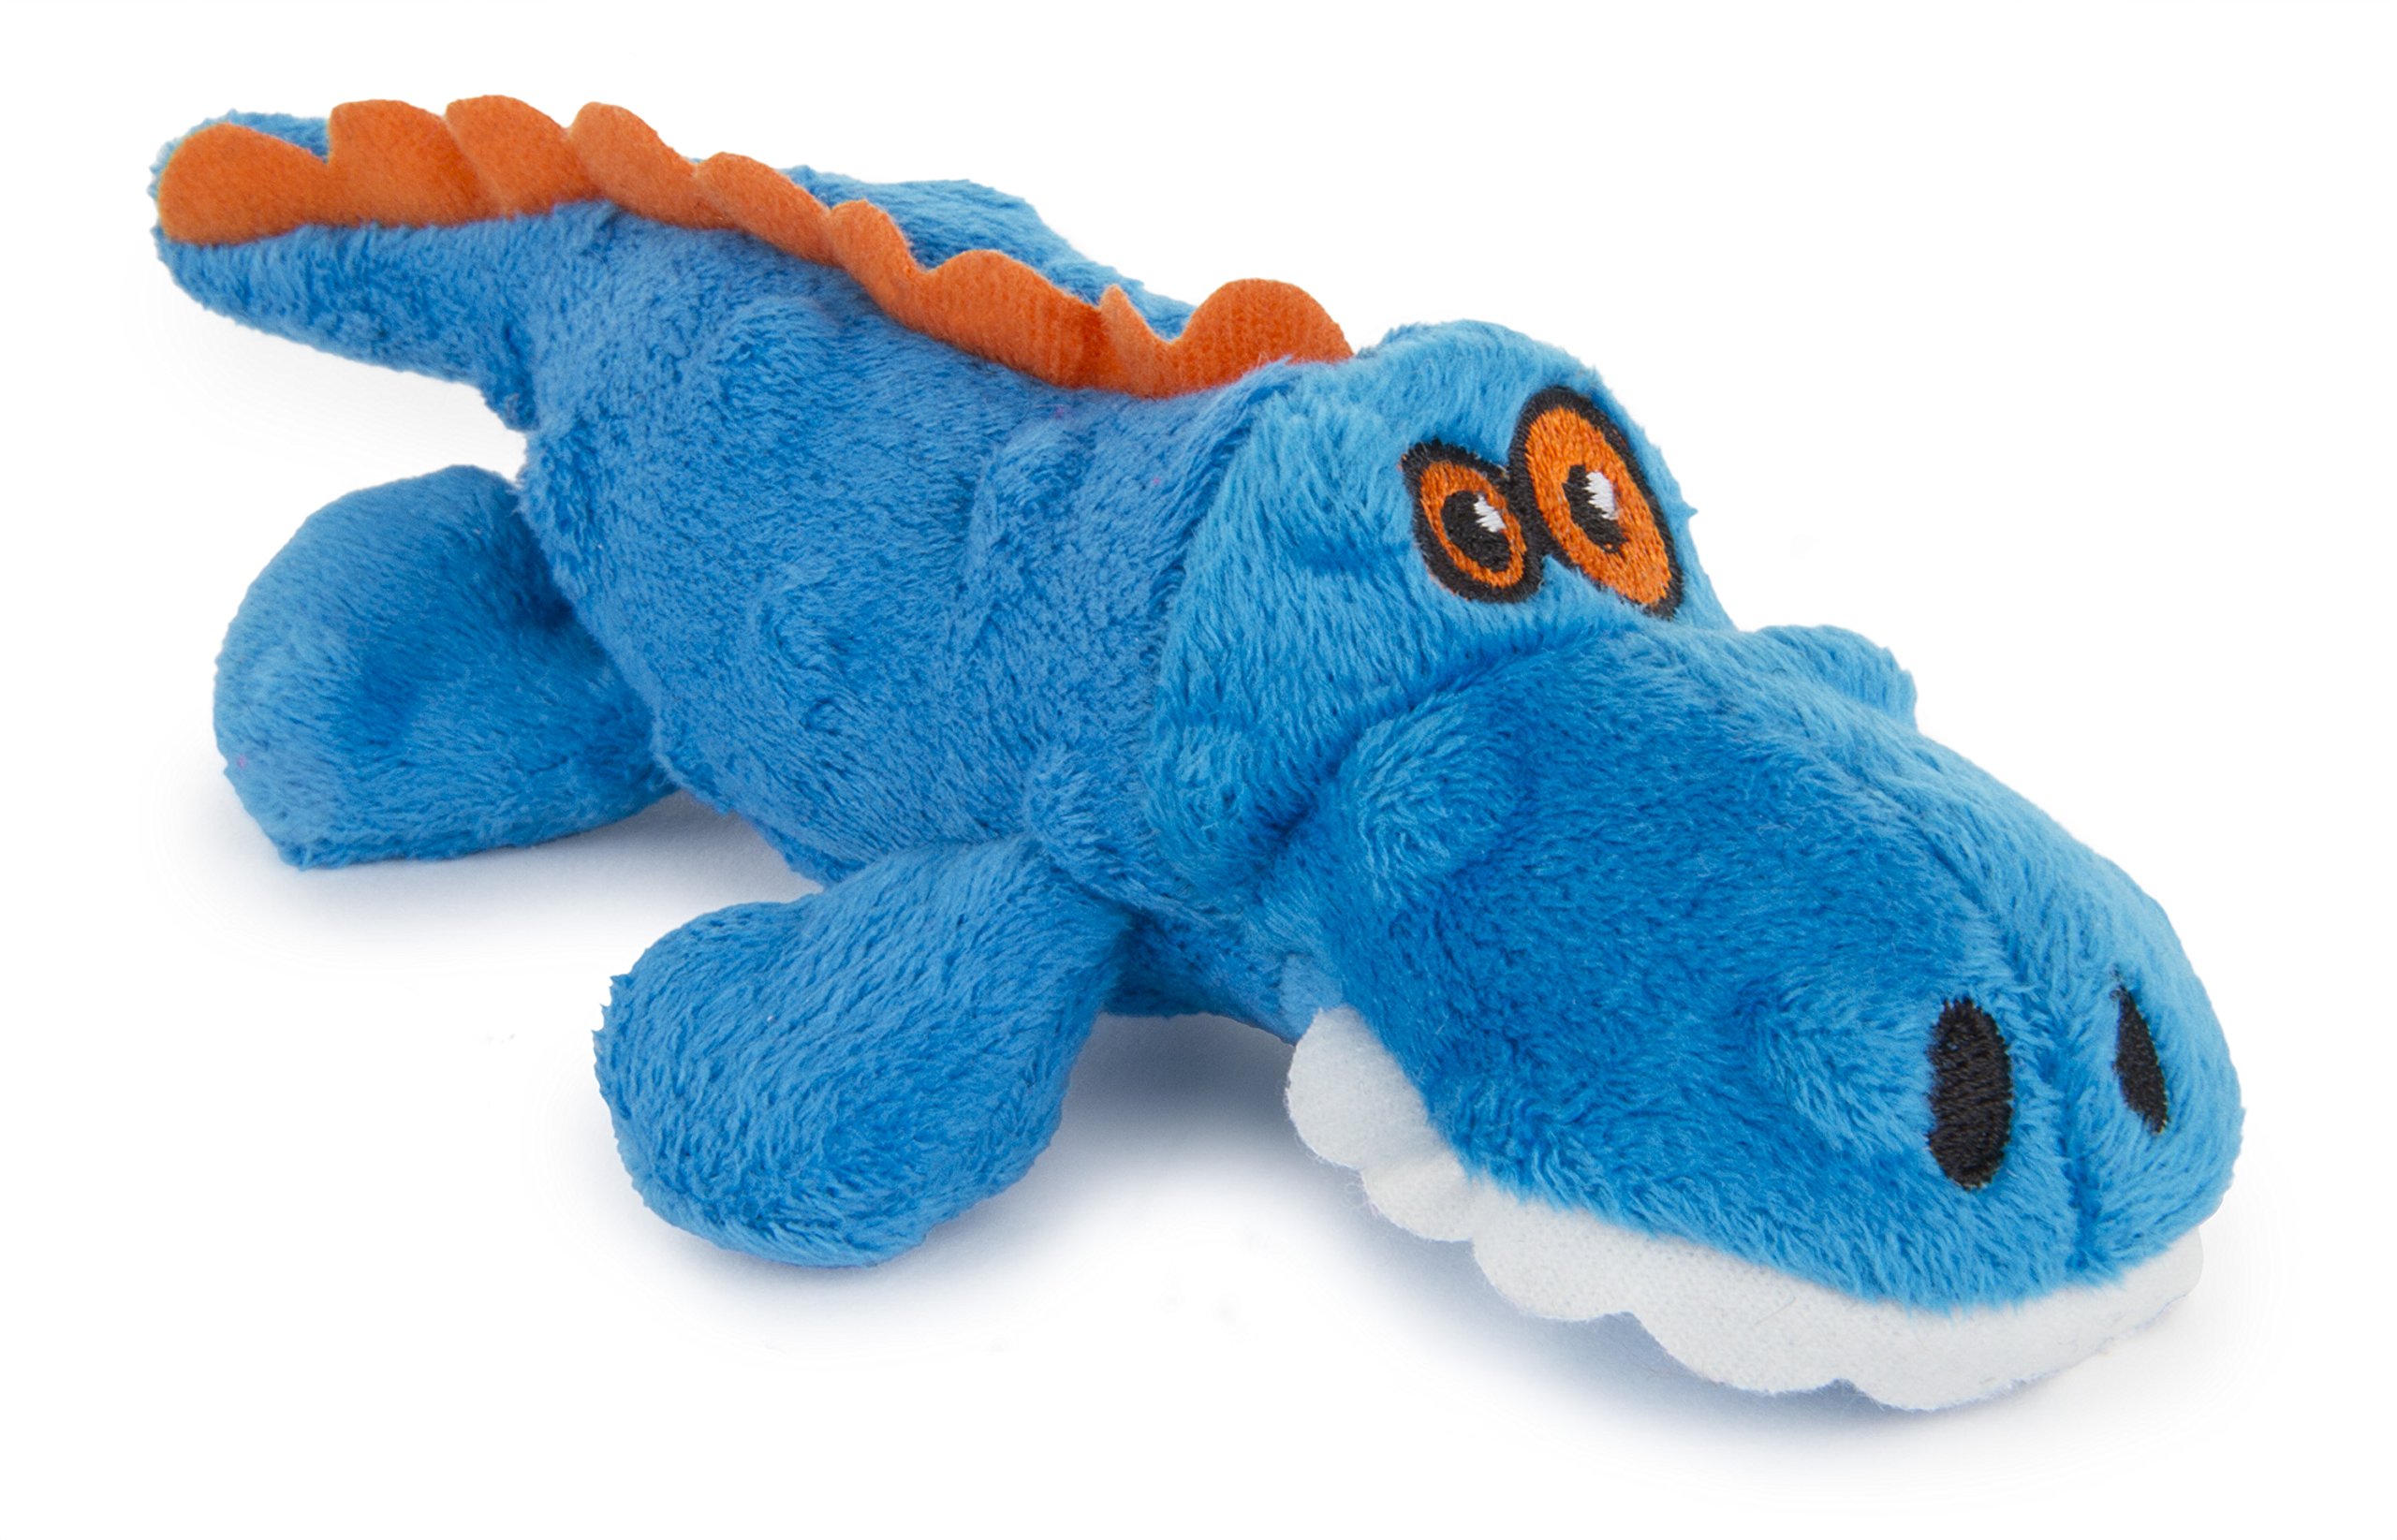 Book Cover goDog Just For Me Gators Squeaky Plush Dog Toy, Chew Guard Technology - Blue, Mini Mini Gator (Blue)